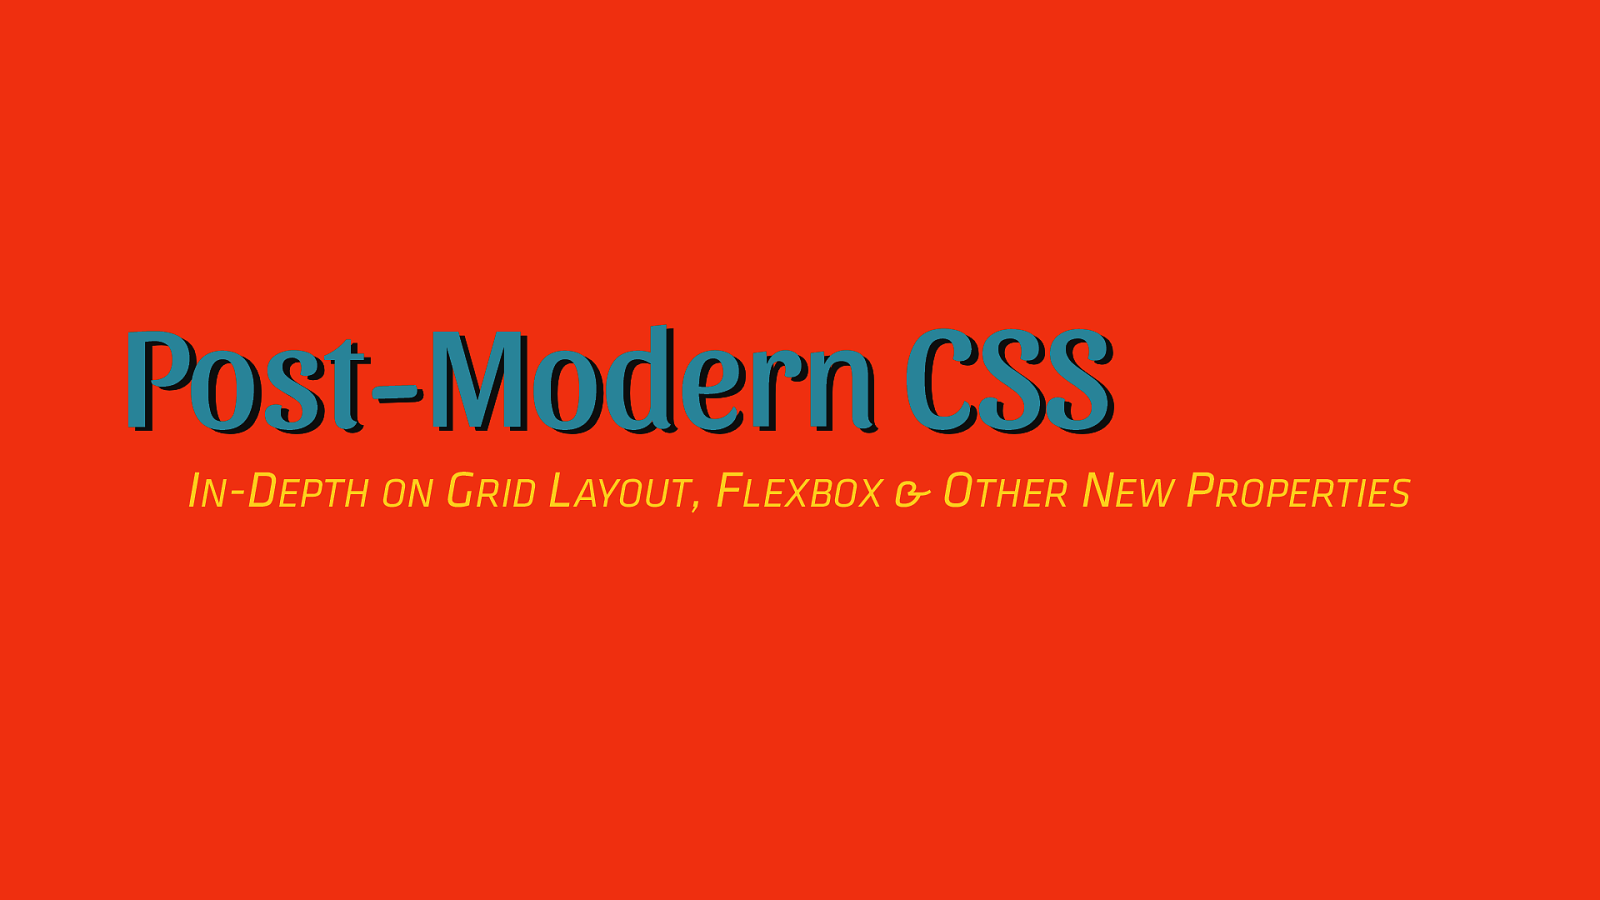 Post-Modern CSS: In-depth on Grid, Flexbox and other new paradigms of CSS